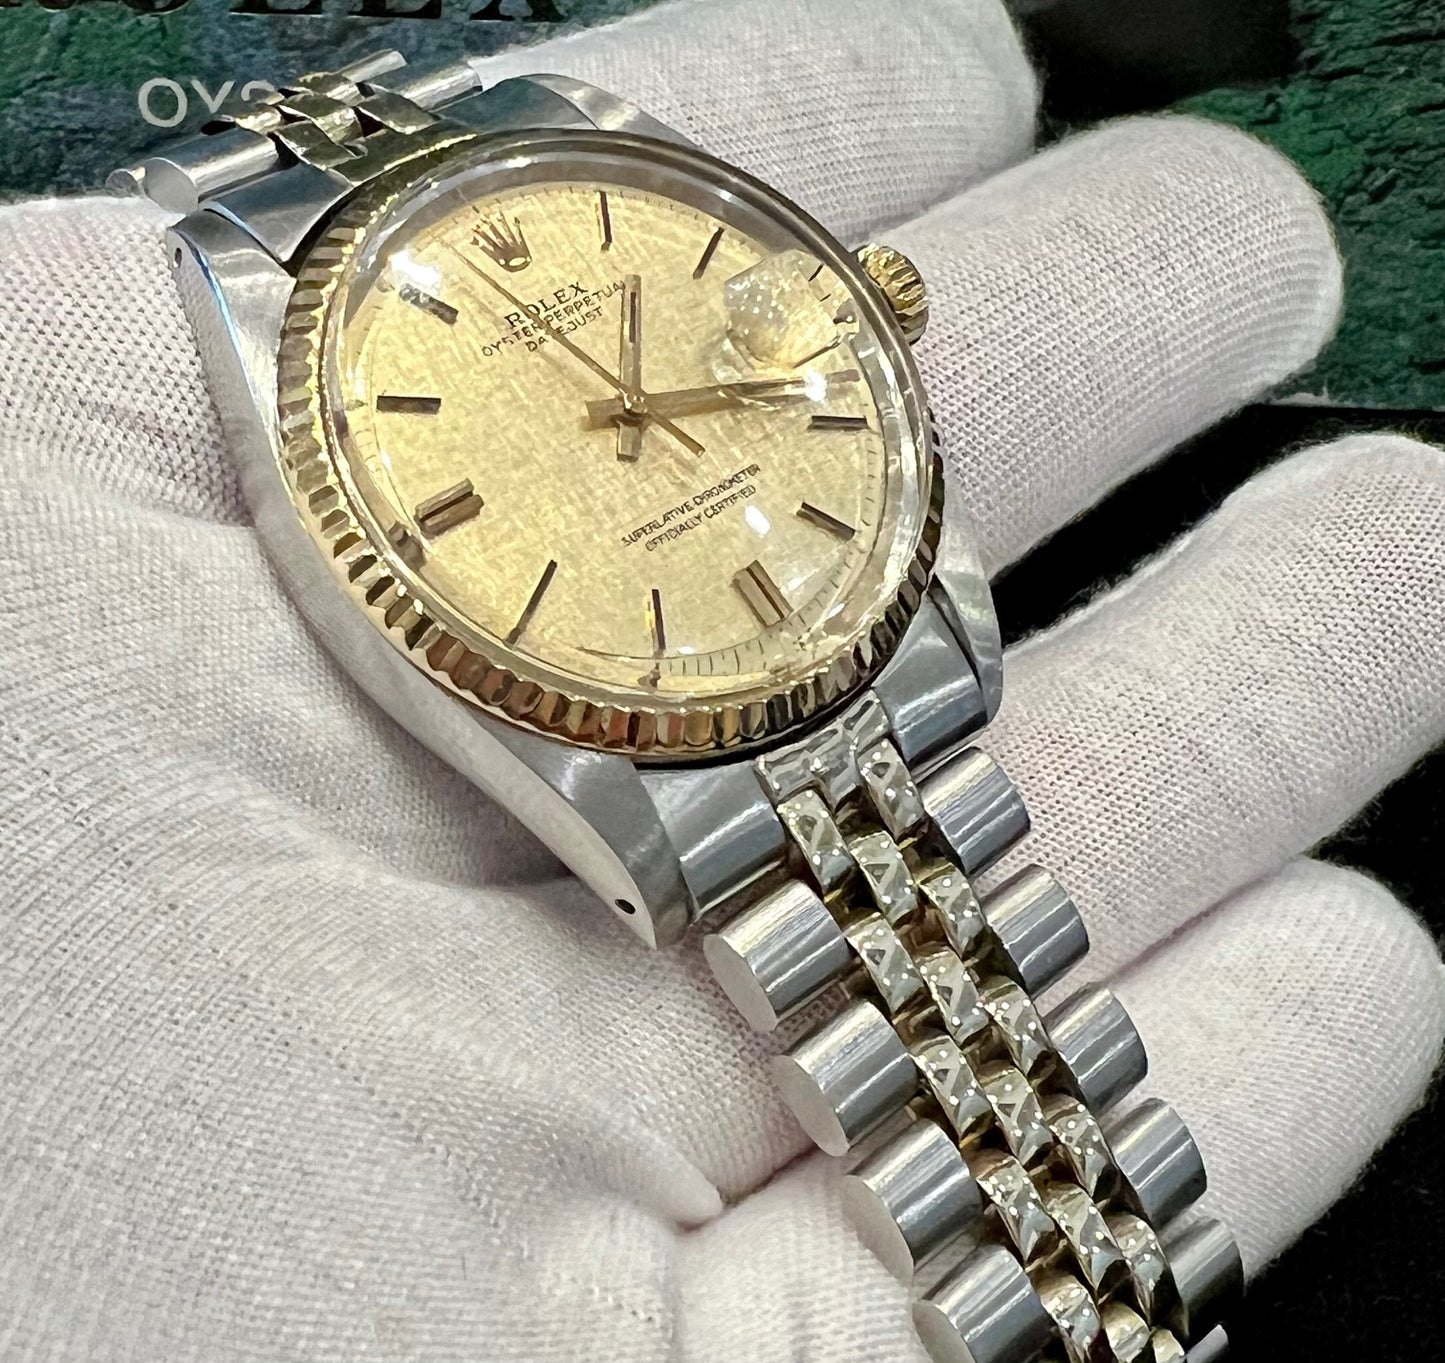 Rolex Datejust 36mm 1601 Champagne Dial 1973 only watch